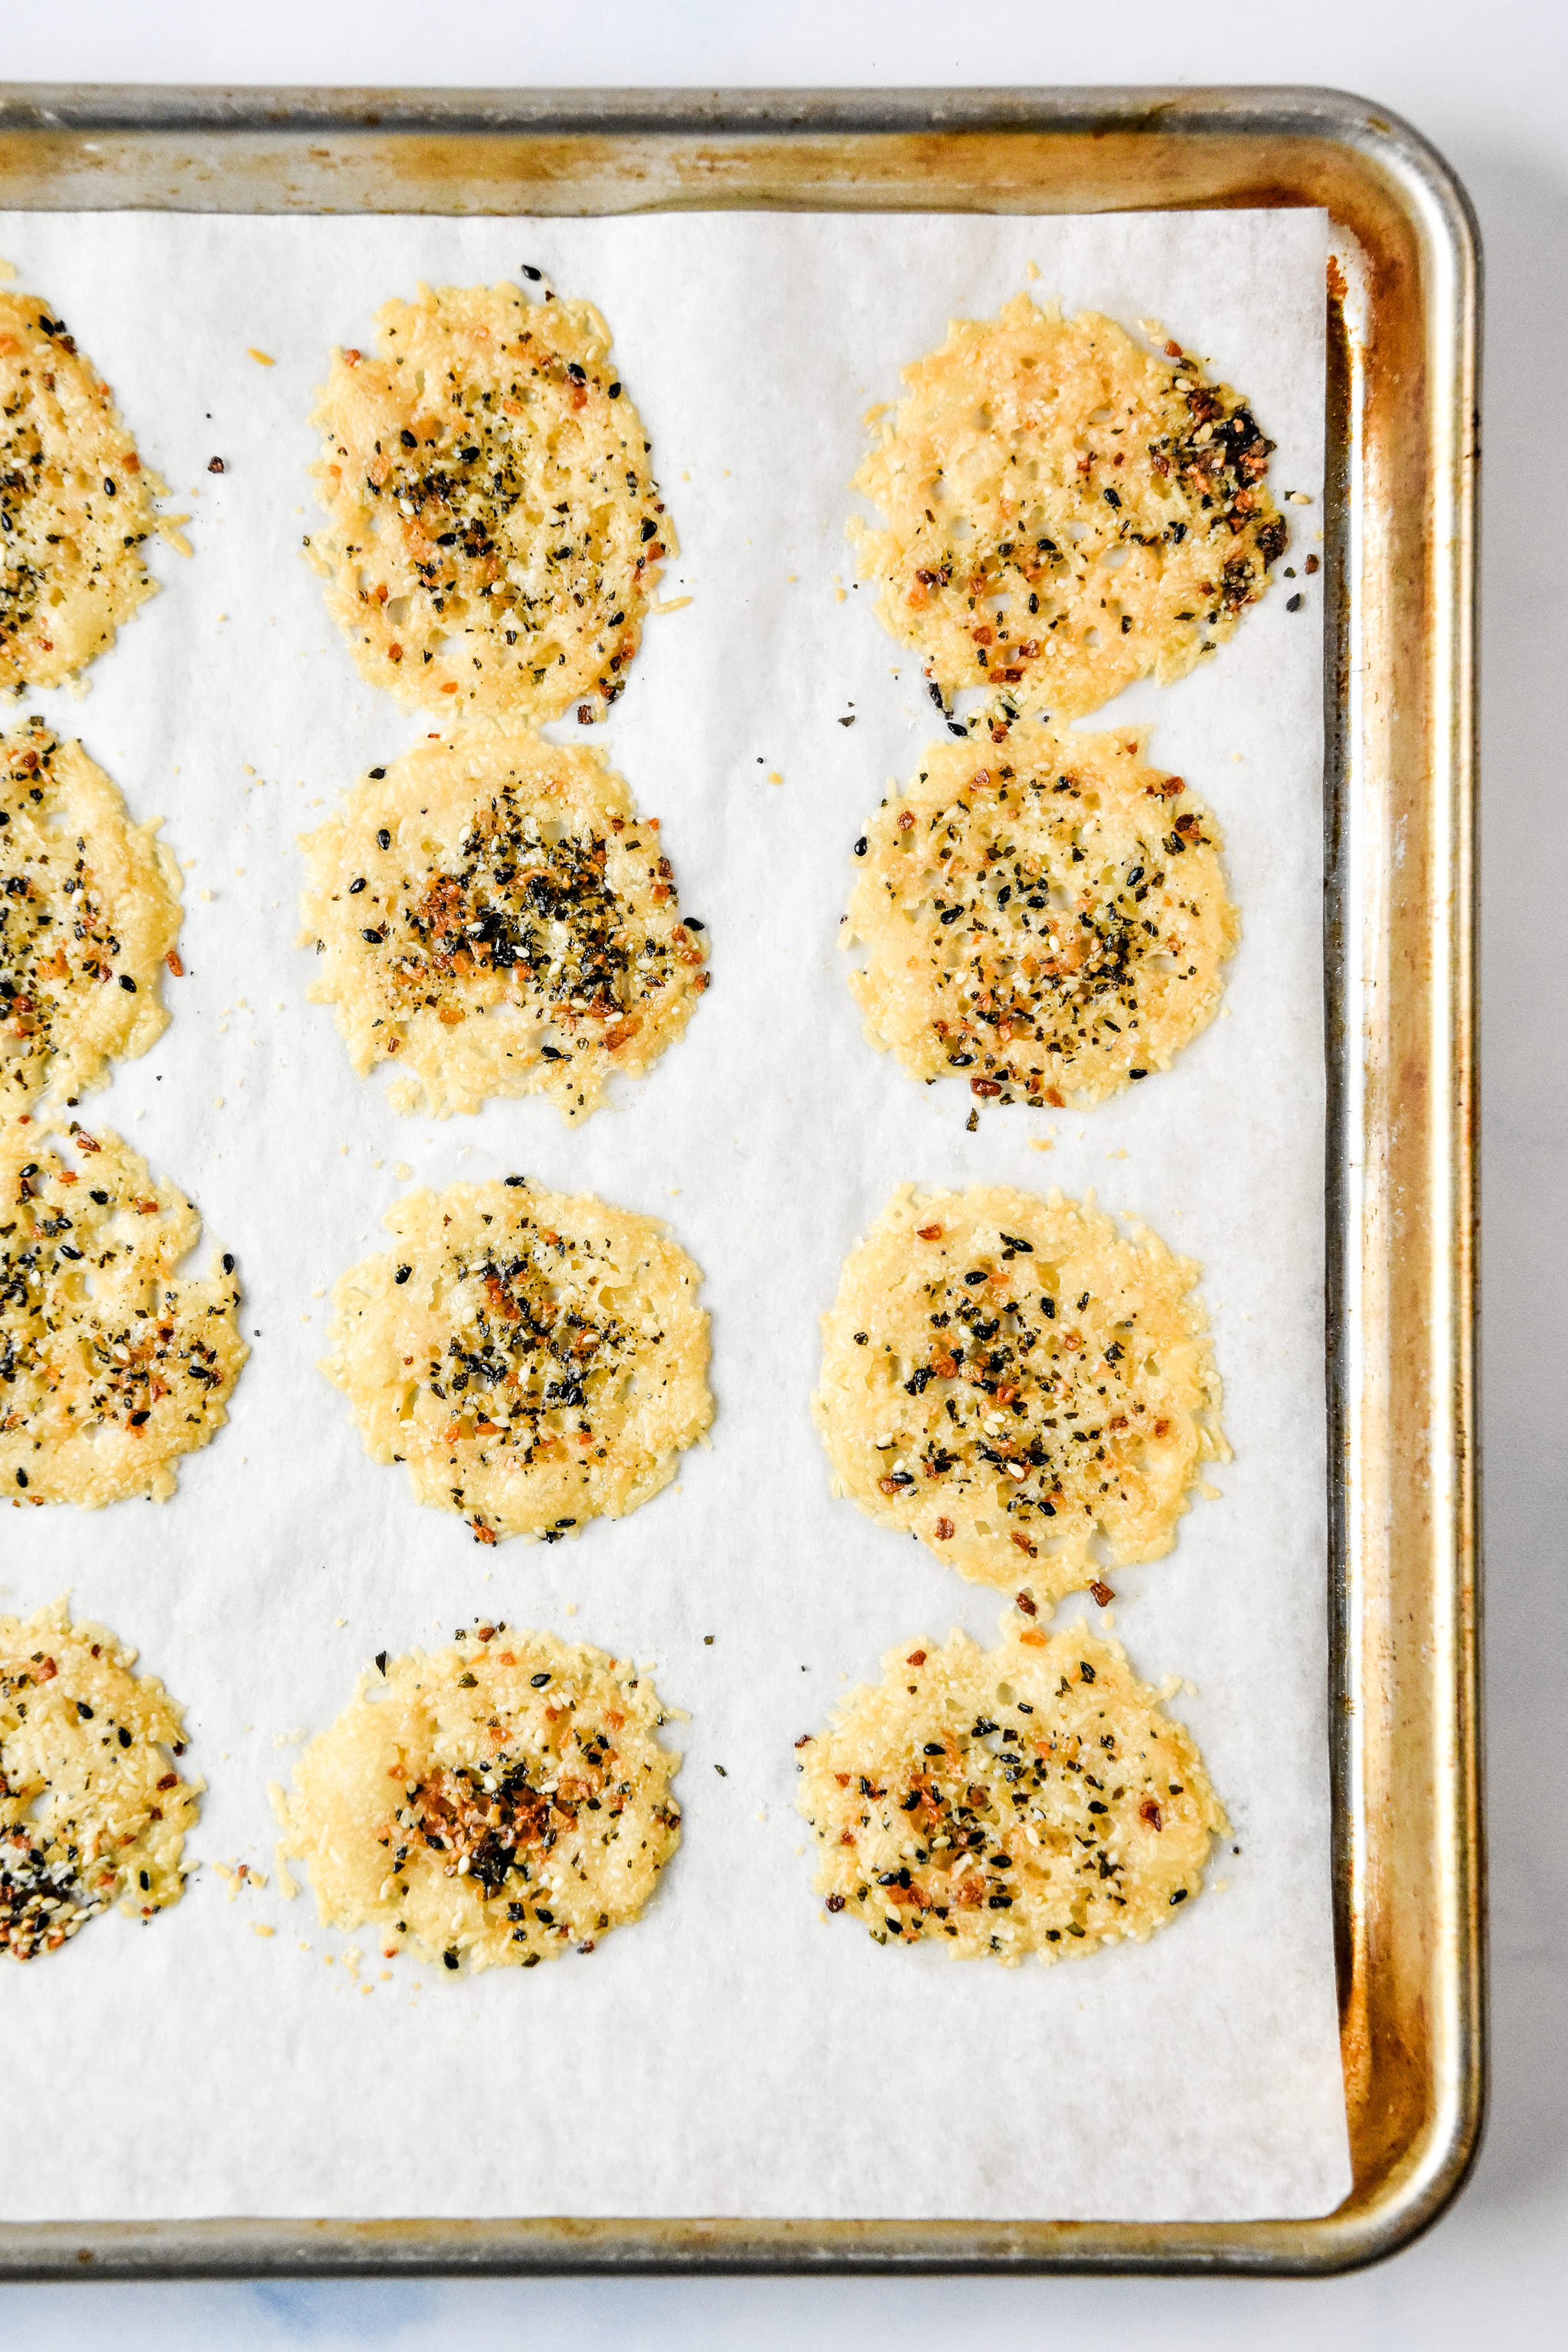 everything bagel baked parmesan cheese crisps fresh from the oven on a baking sheet